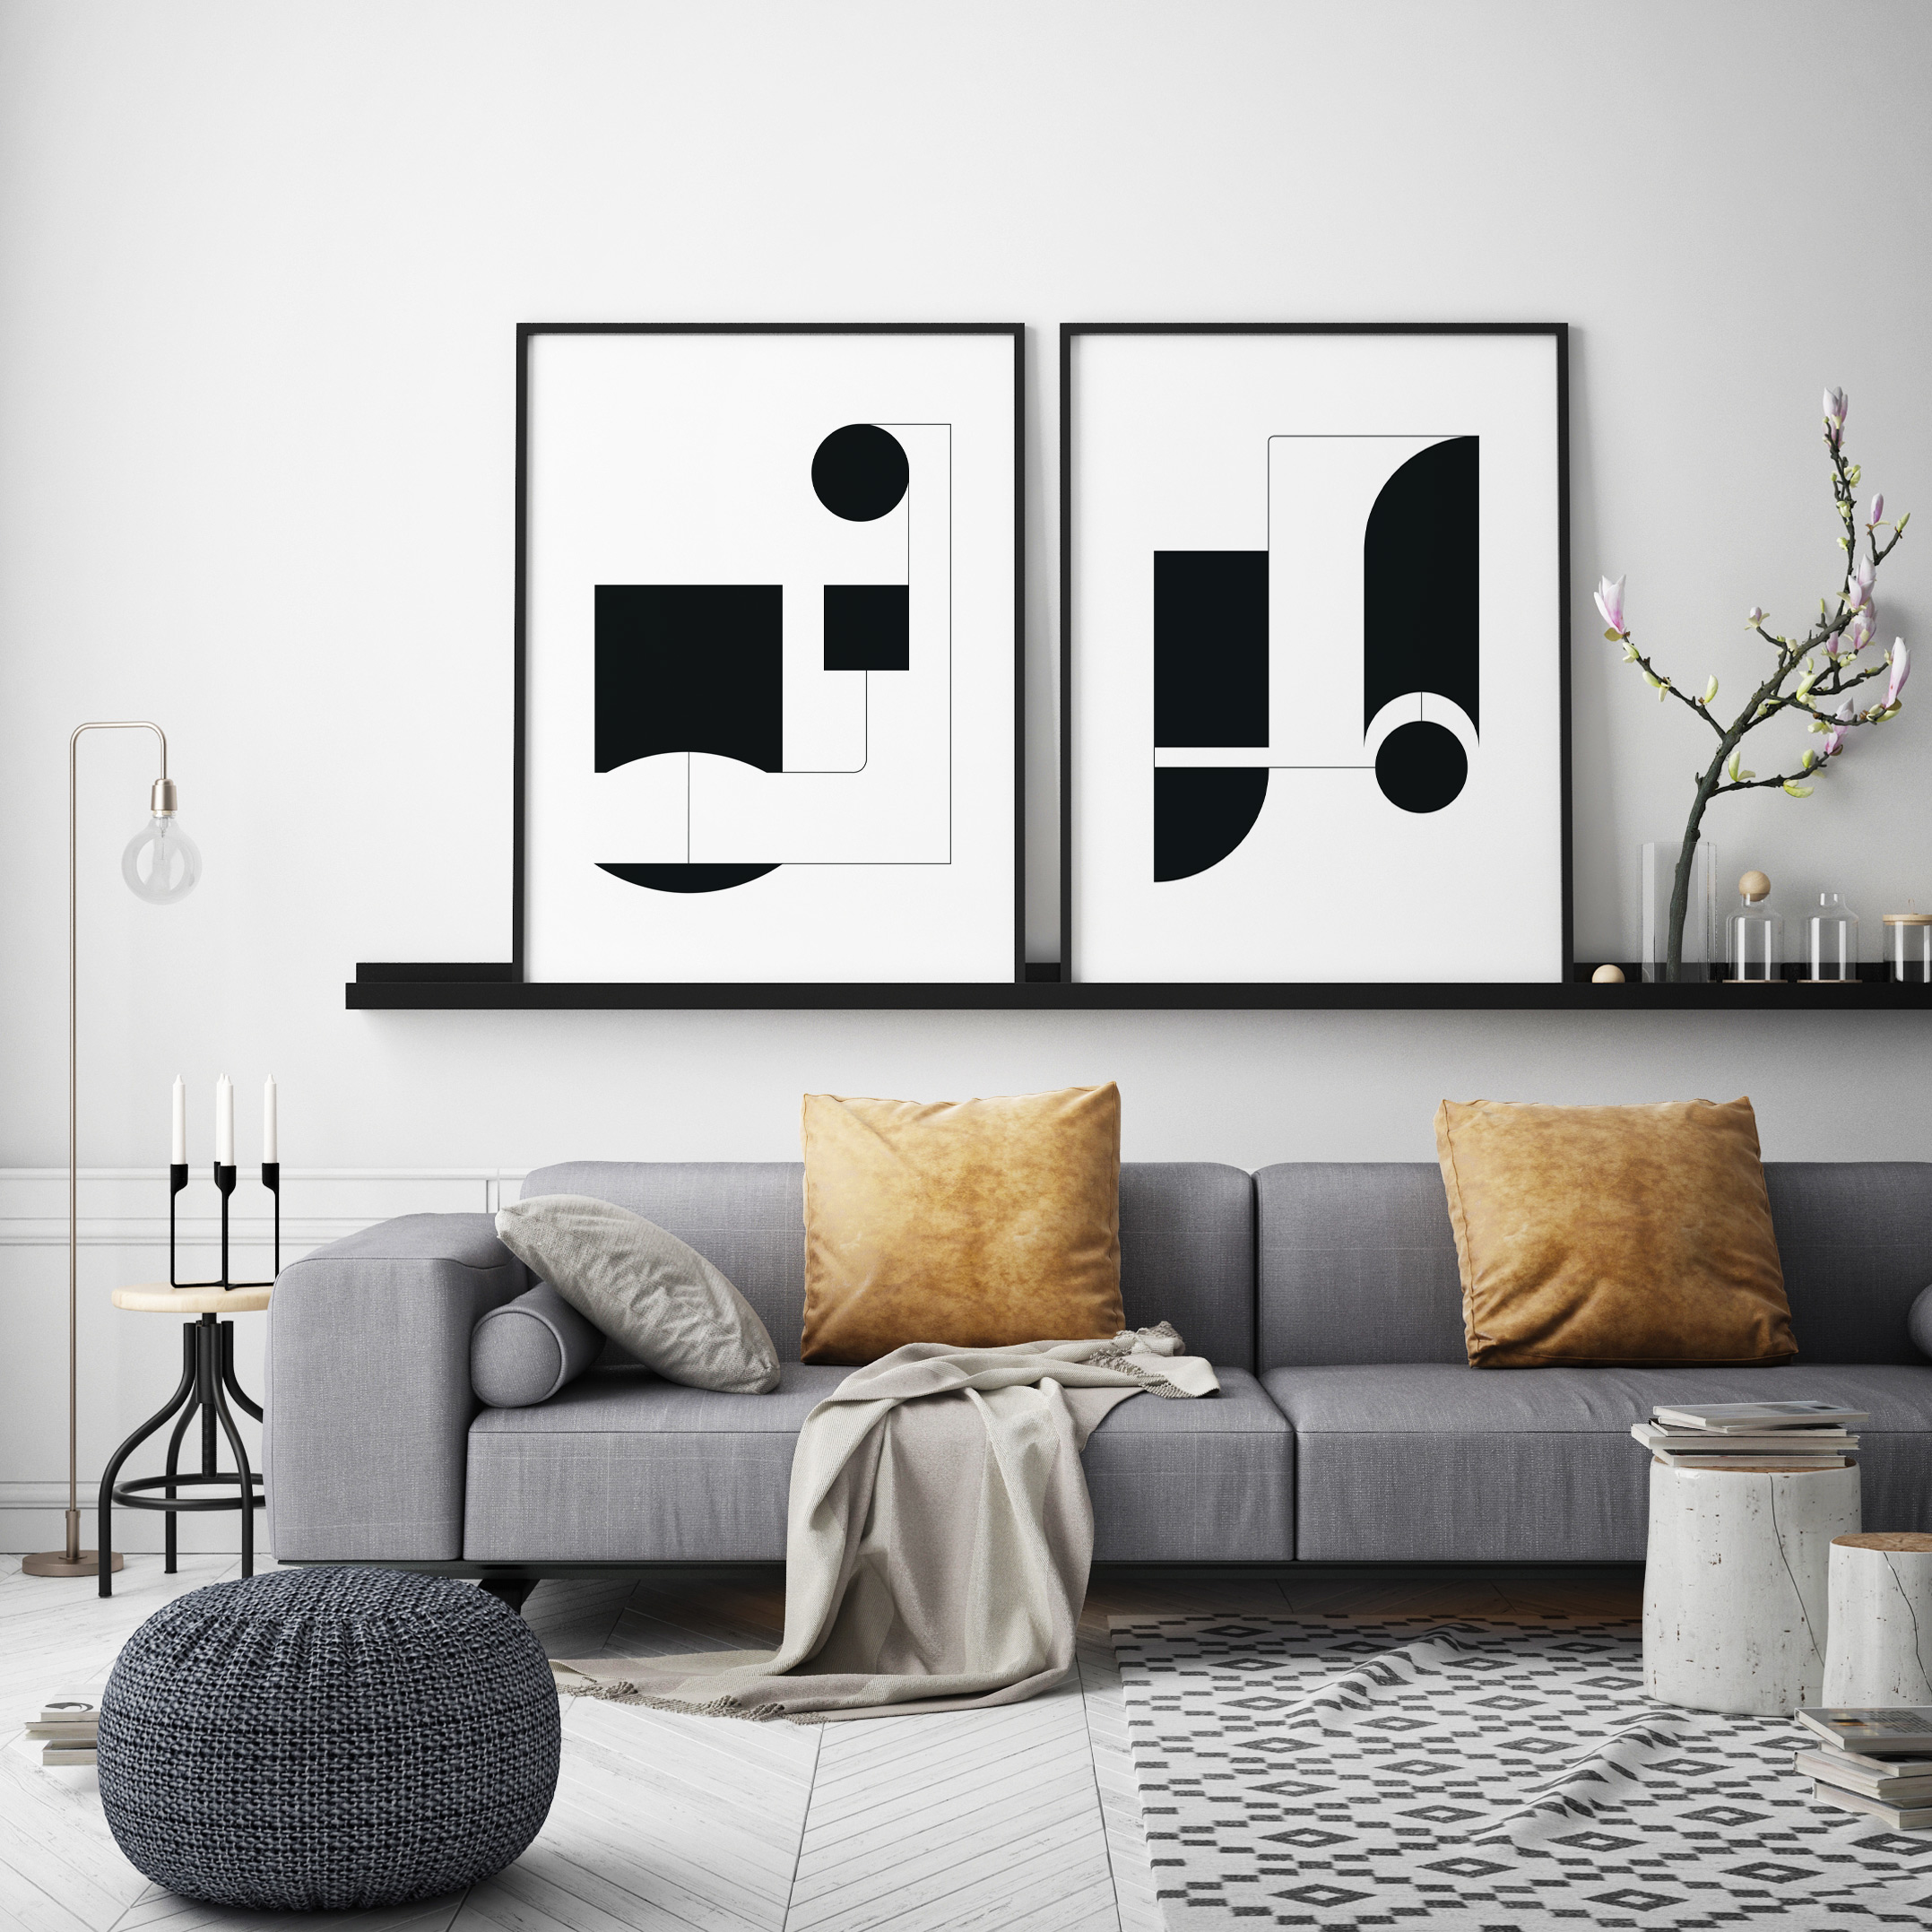 TERESA VAN // STRUCTURED SHAPES M09 - HAND PAINTED PICTURES | BLACK + WHITE